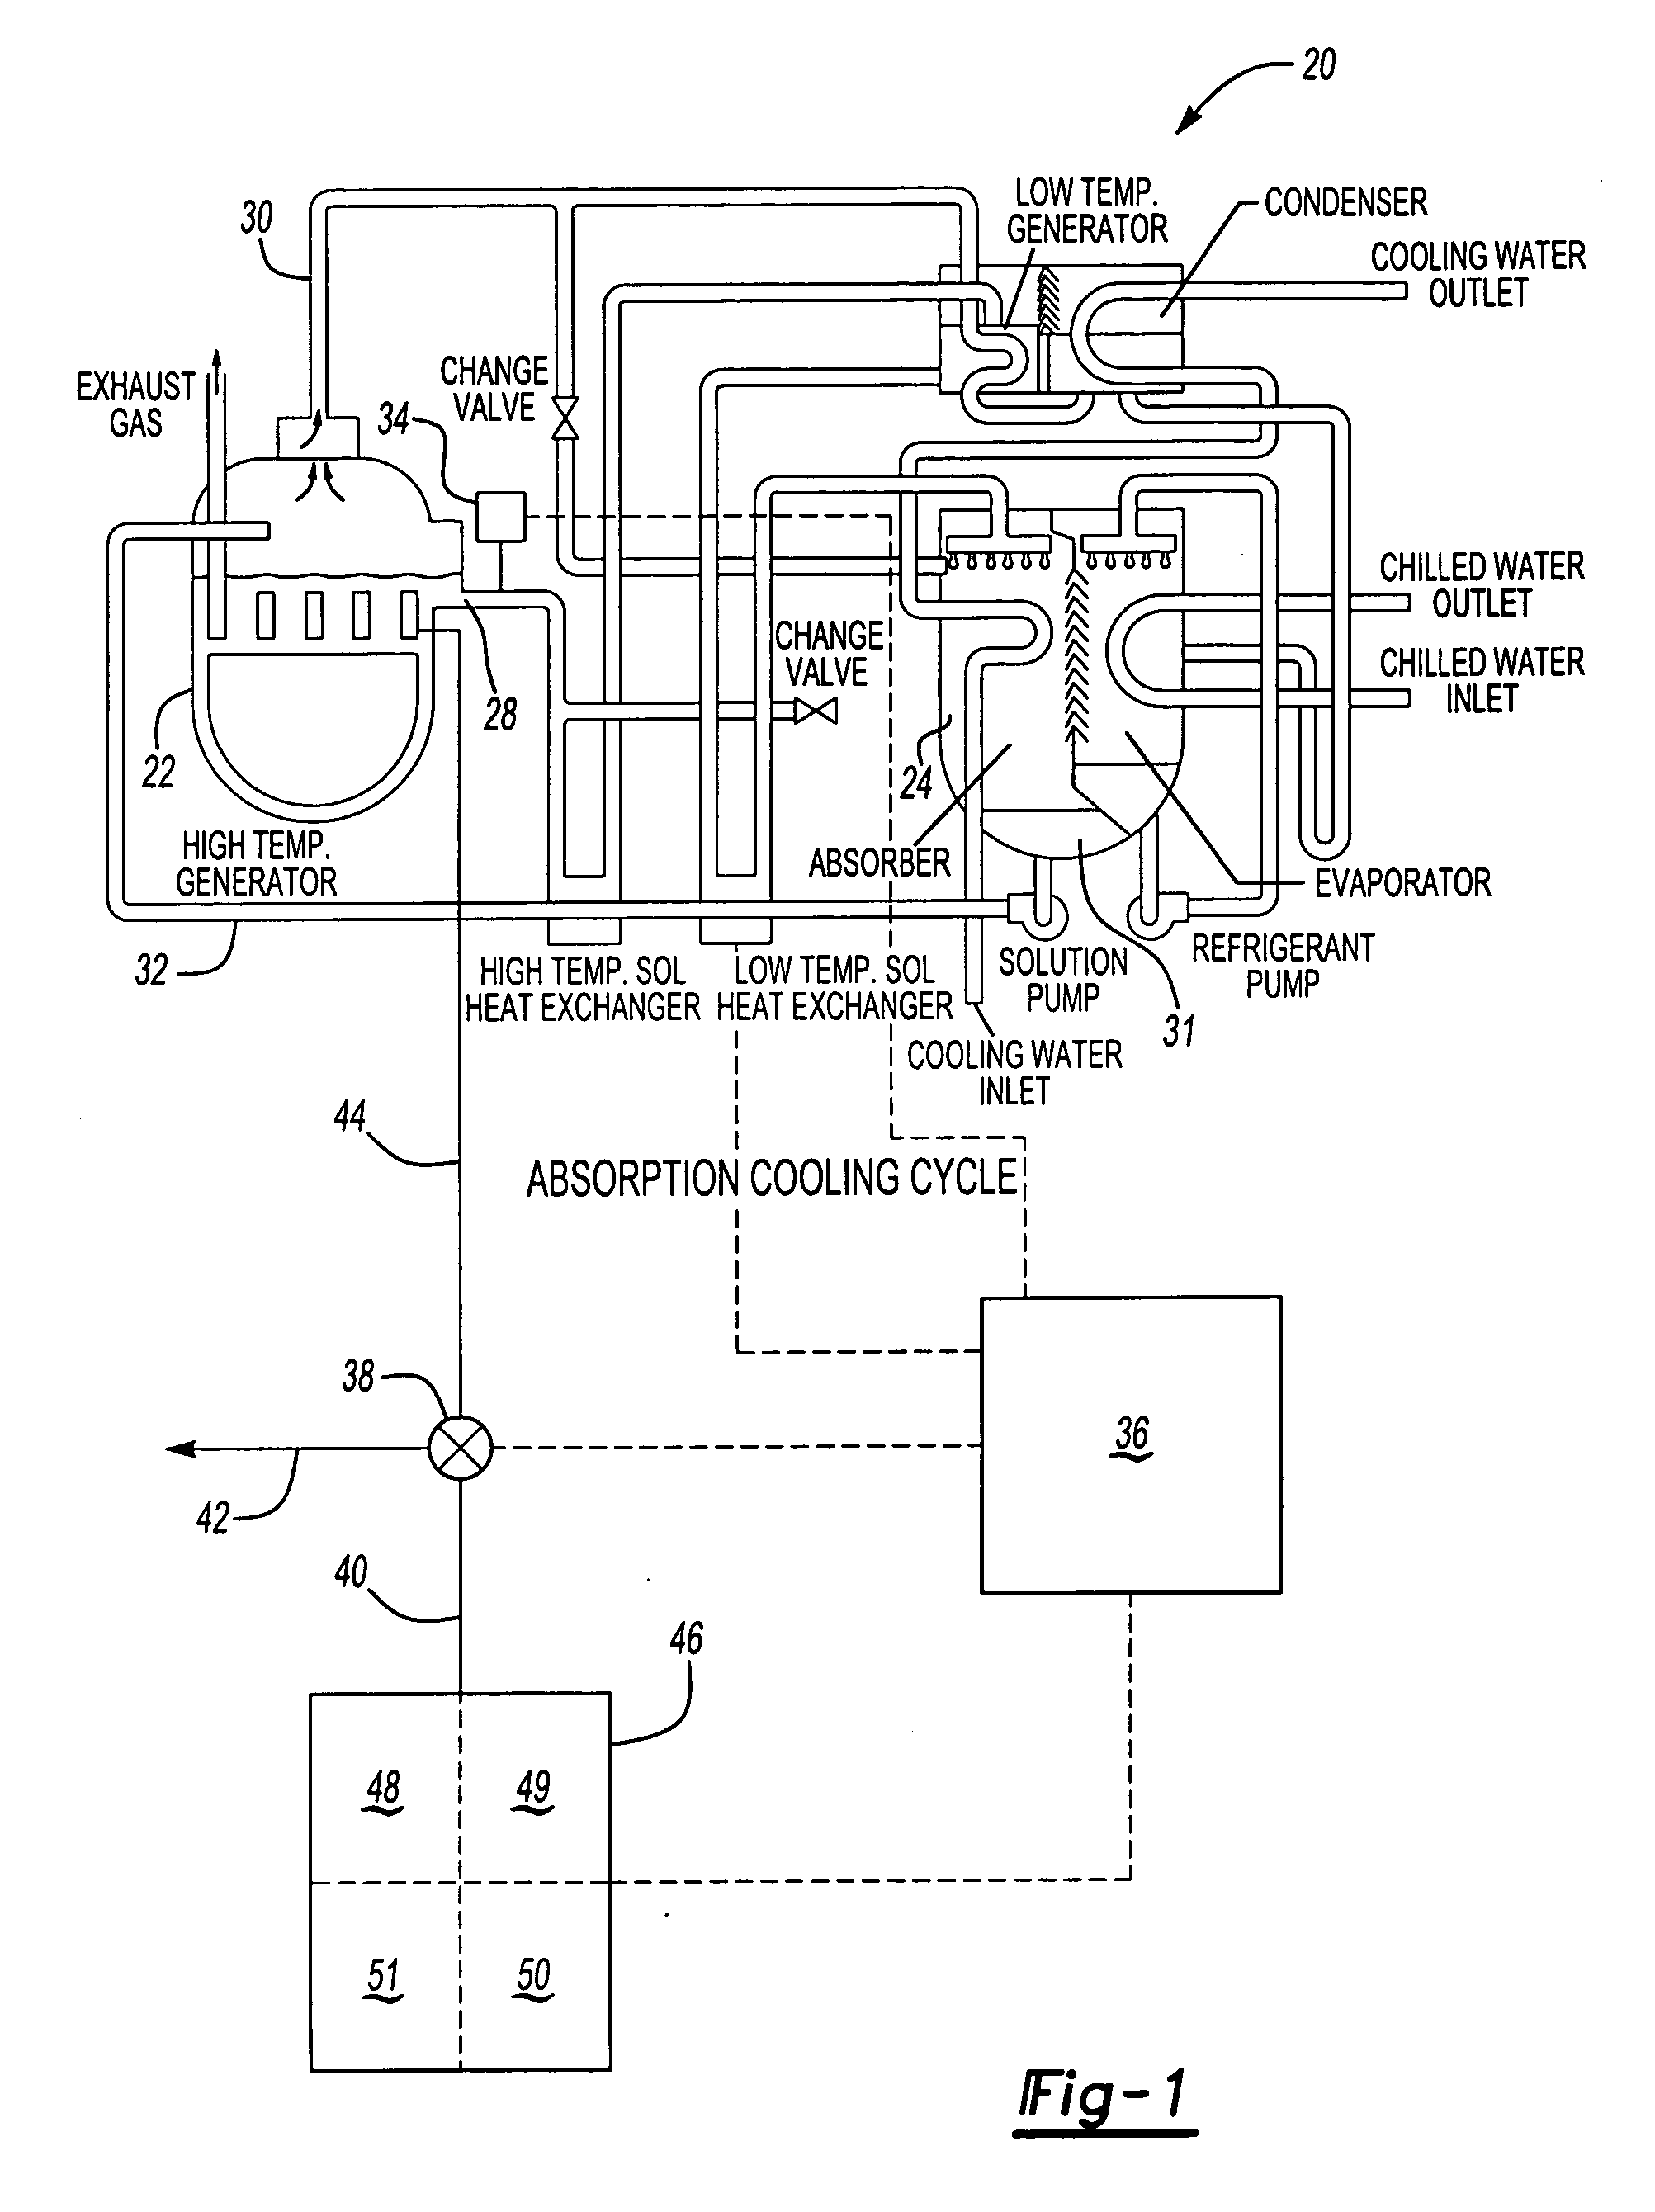 Efficient control for smoothly and rapidly starting up an absorption solution system